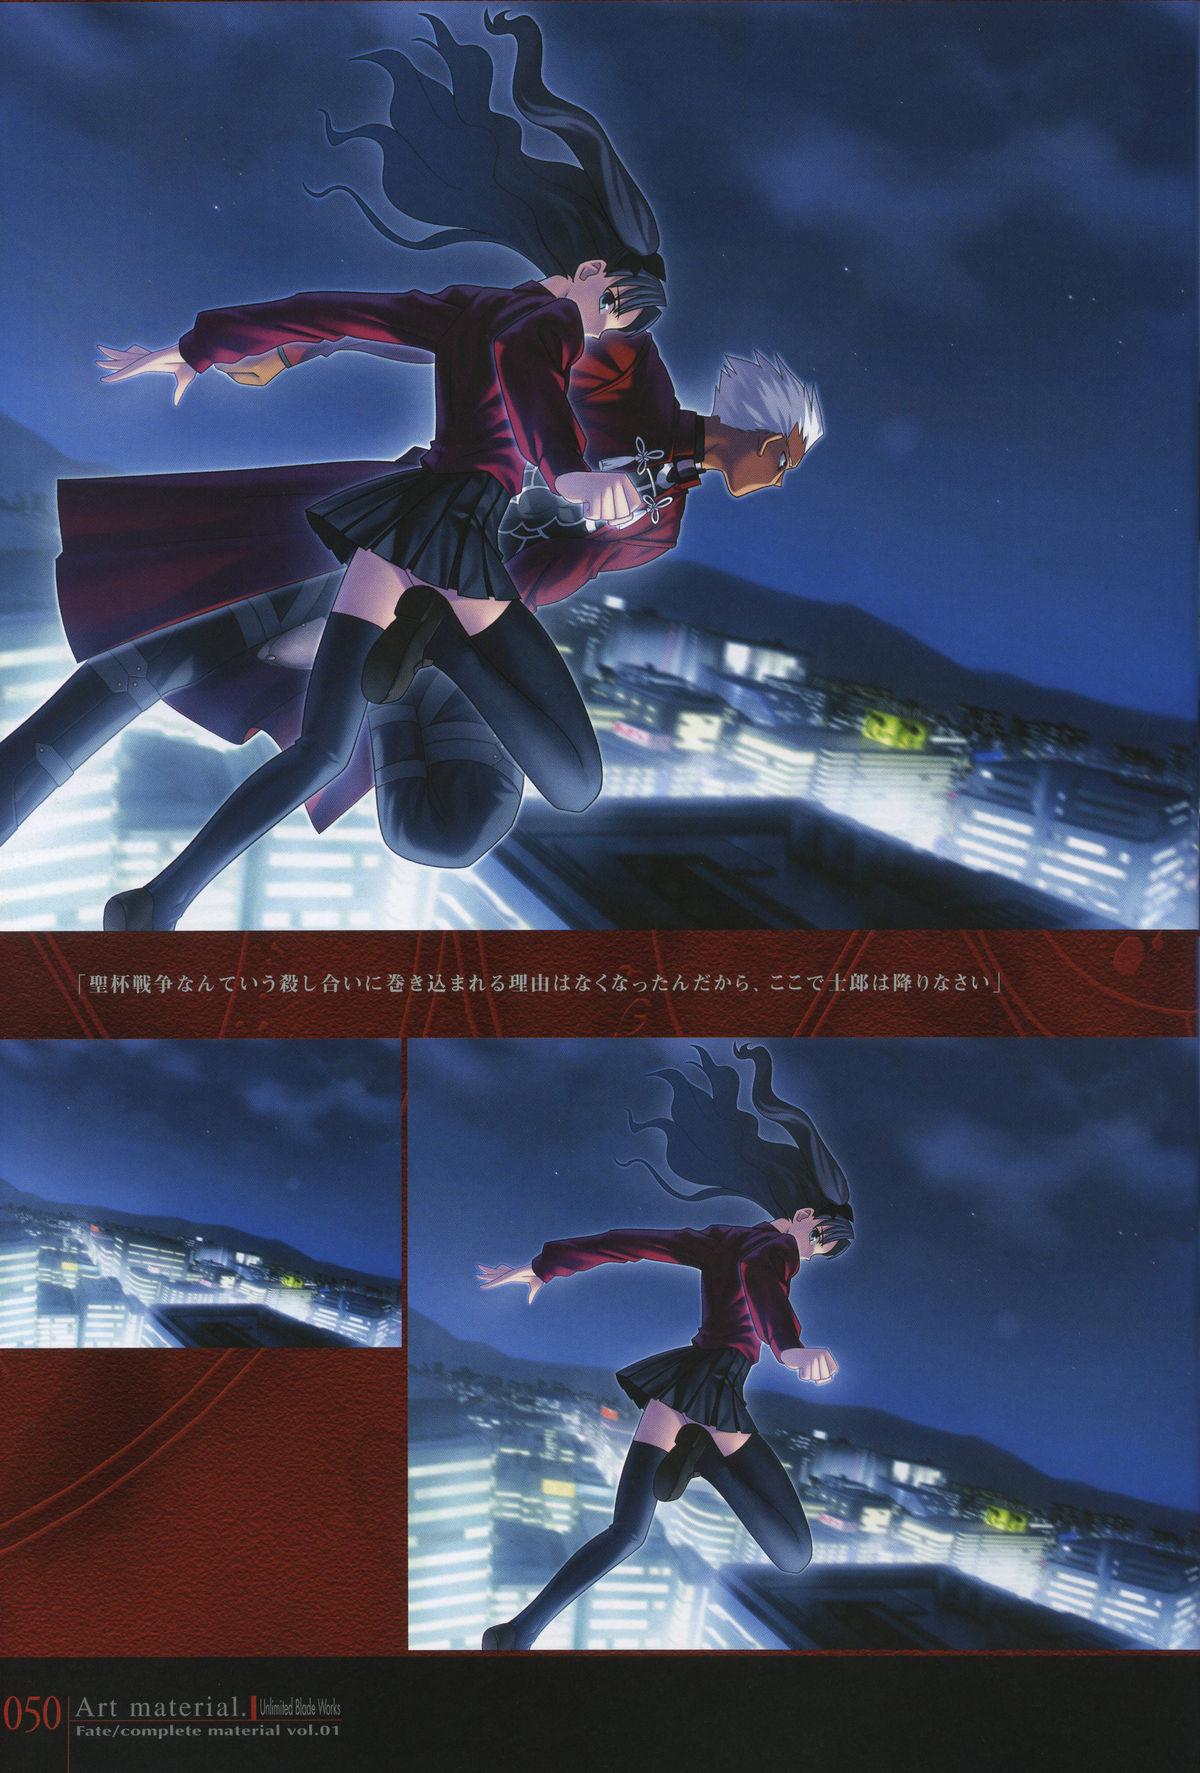 Fate/complete material I - Art material. 54